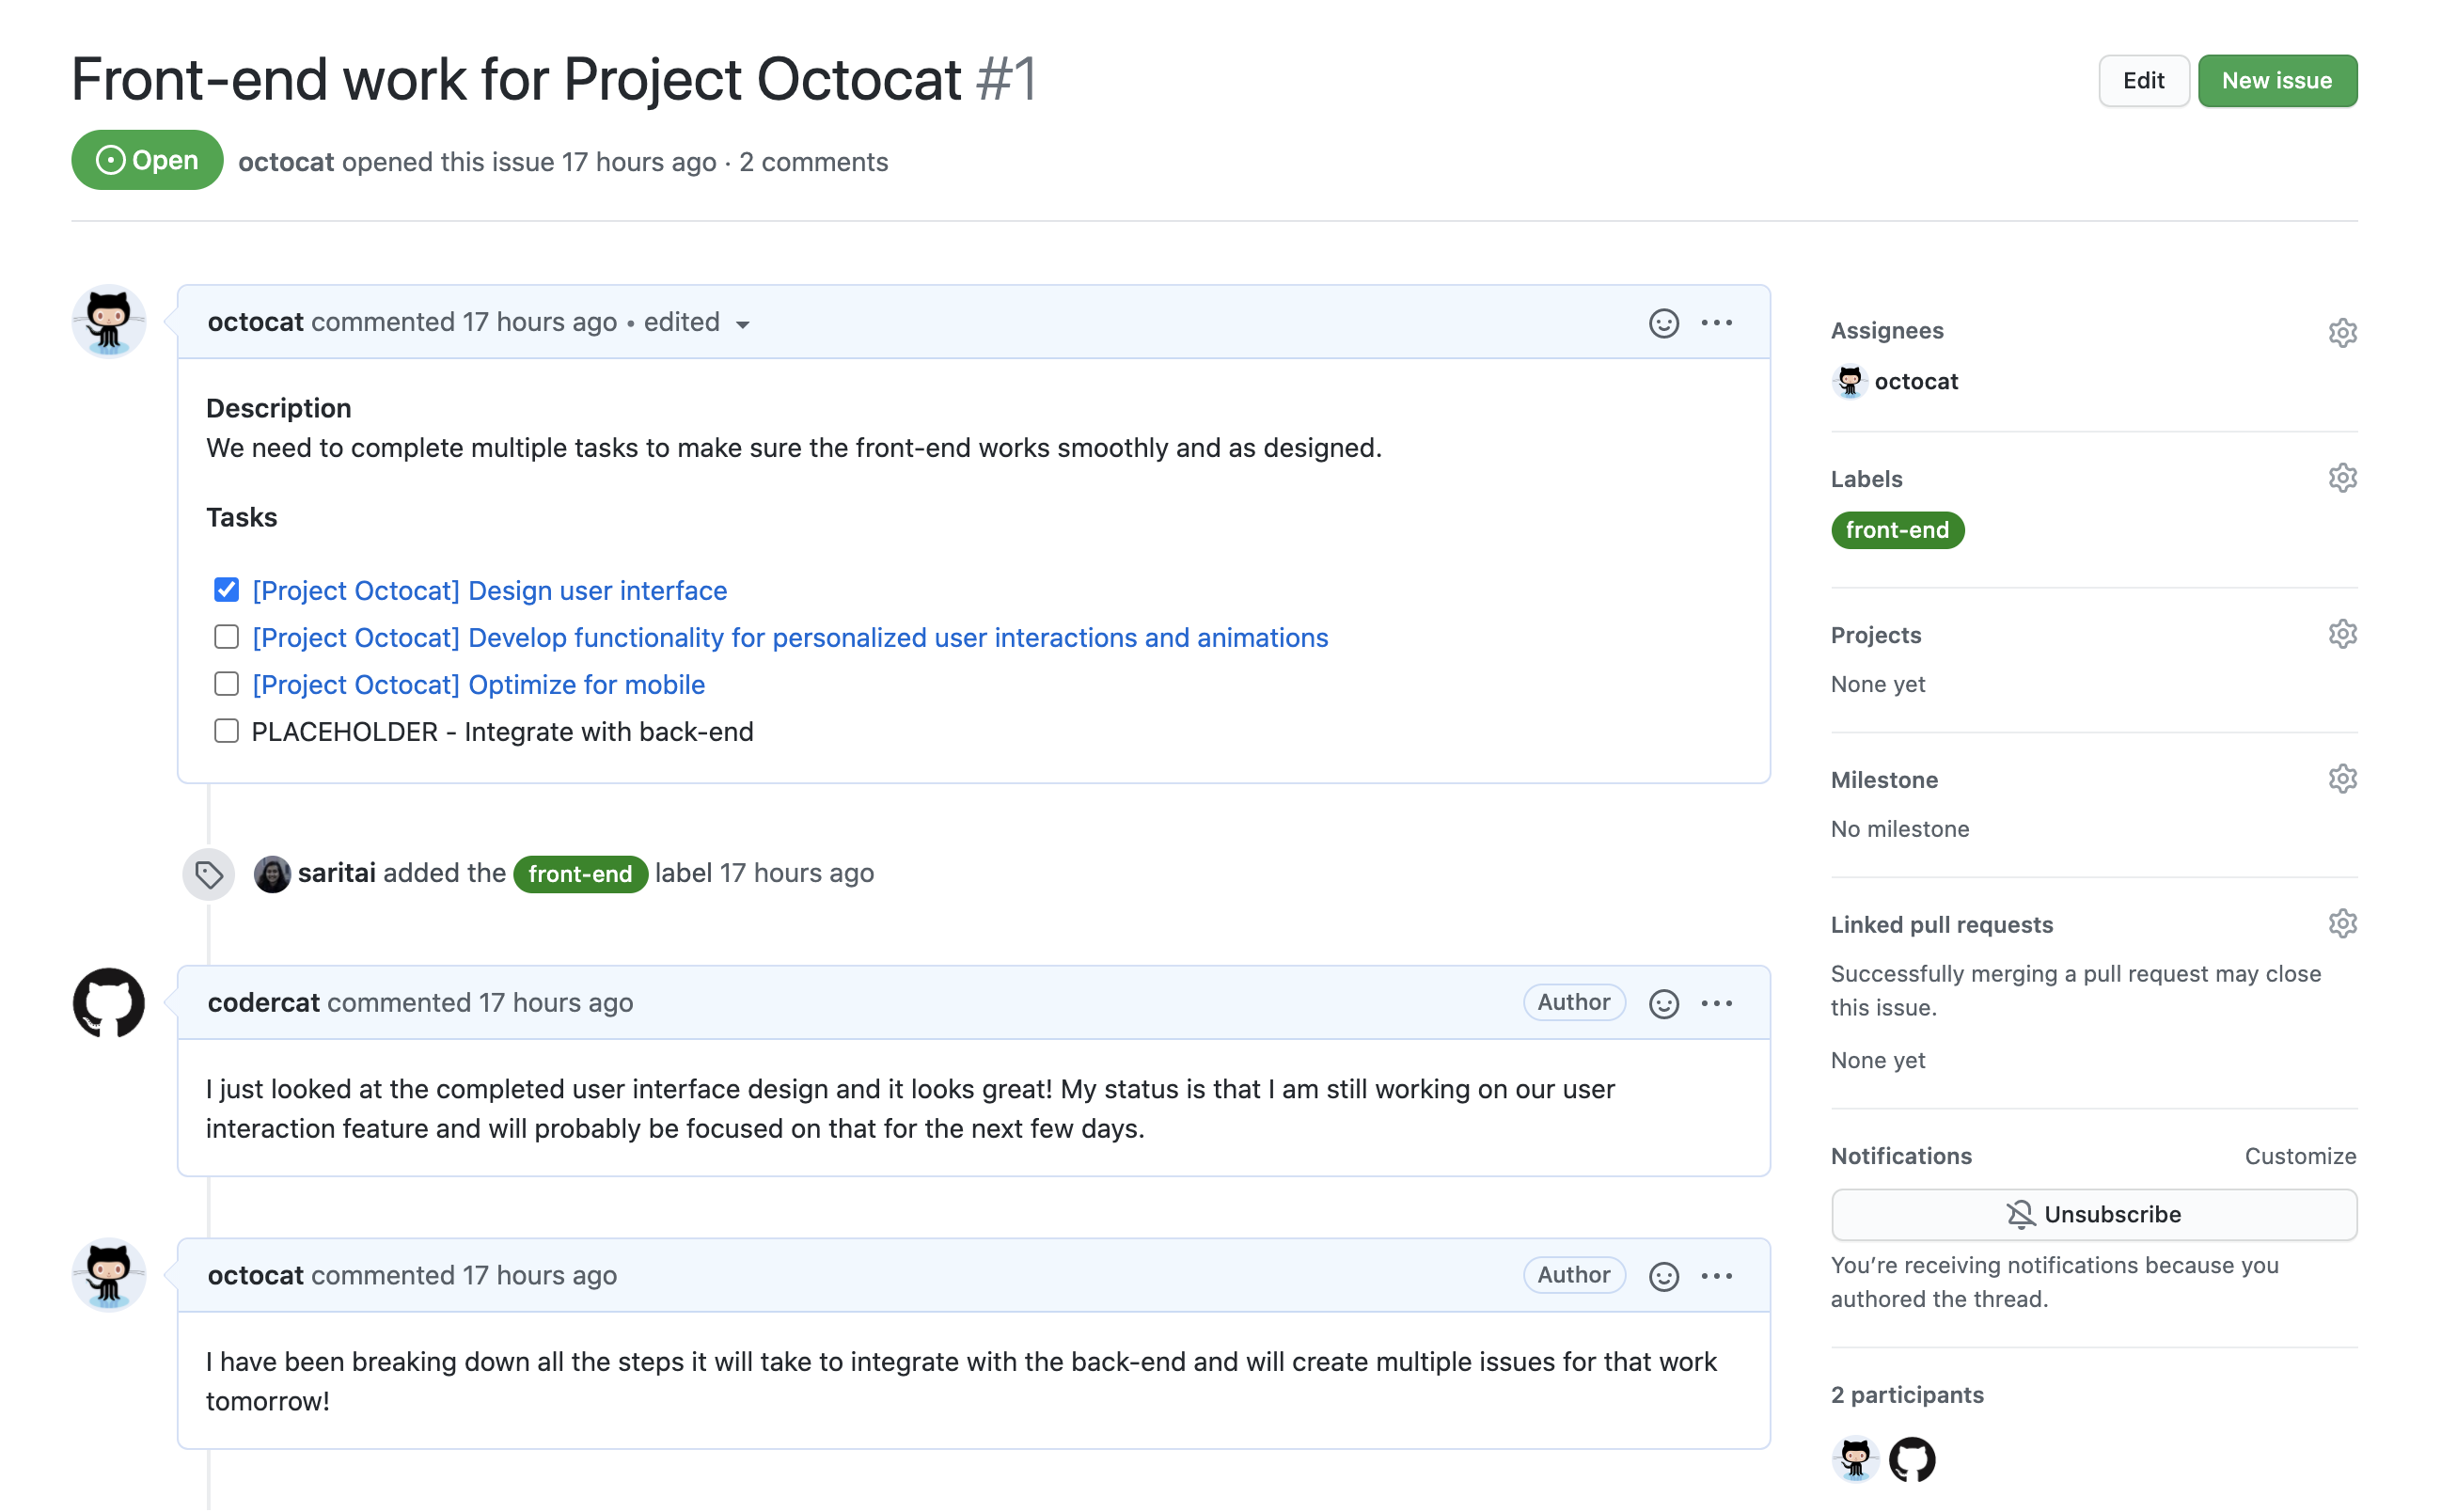 Screenshot of an issue called "Front-end work for Project Octocat." Comments from both @codercat and @octocat provide status updates on the work.